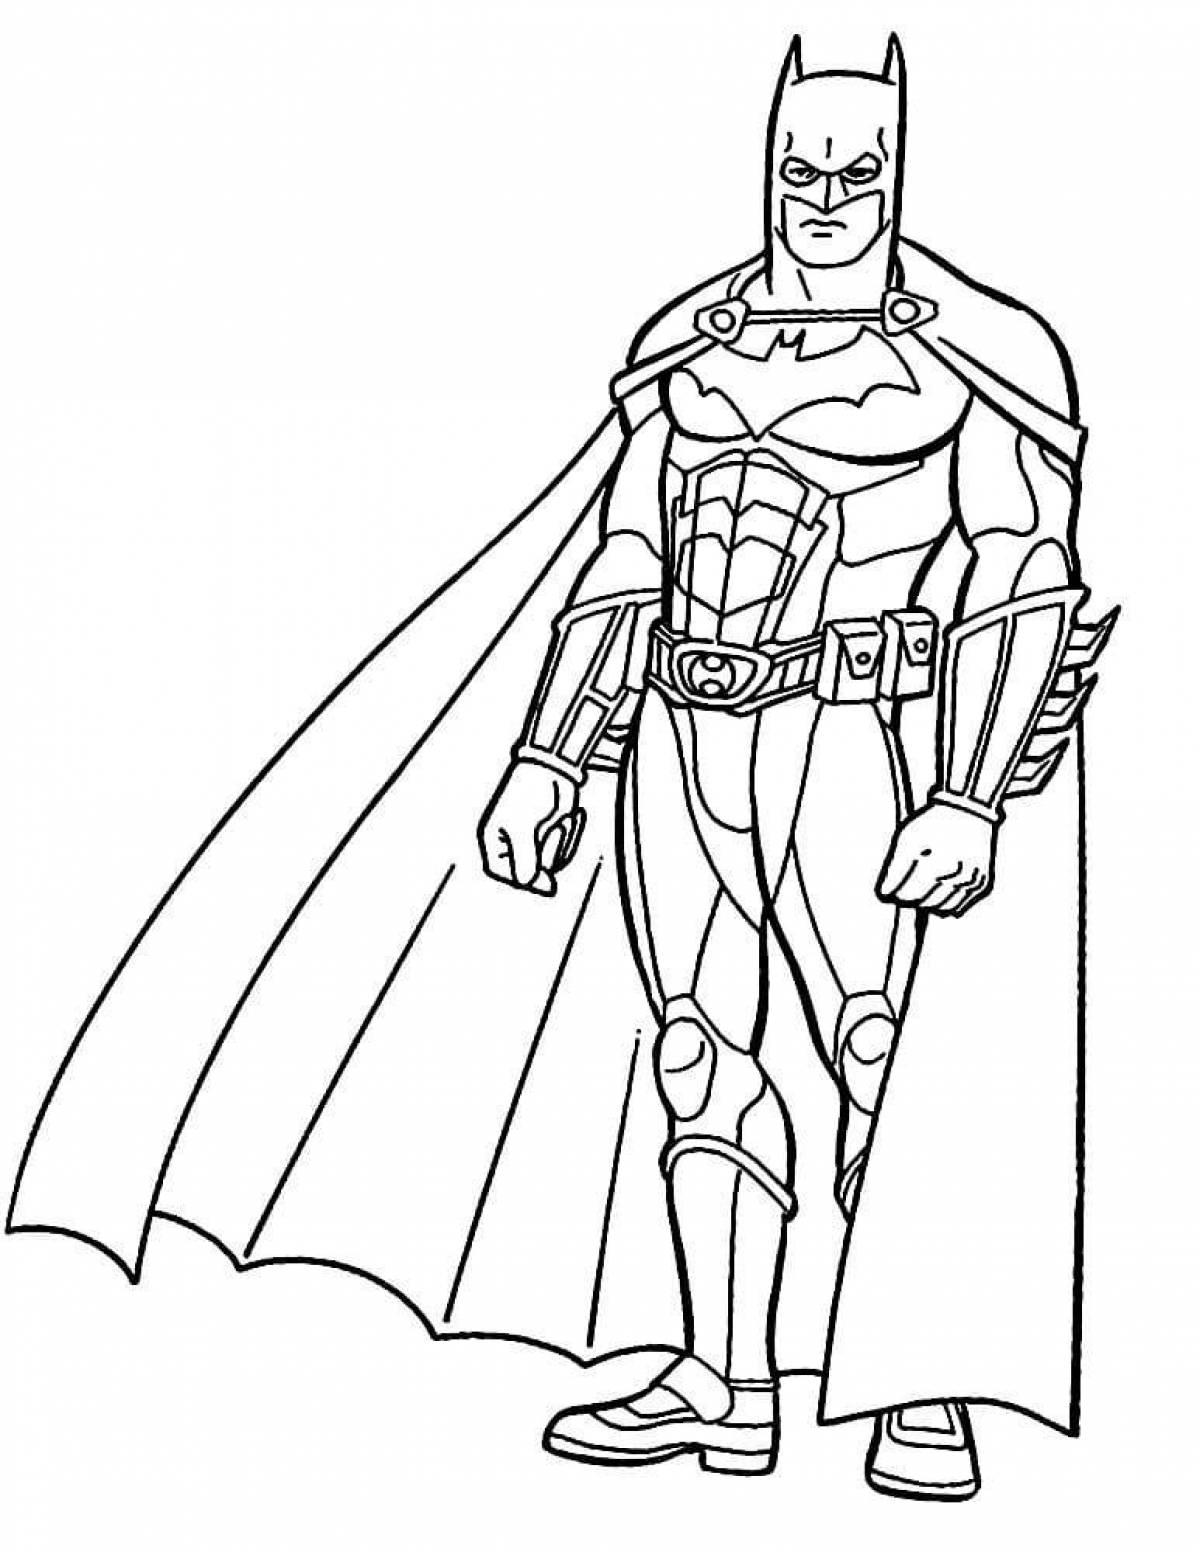 Coloring pages of superheroes for boys